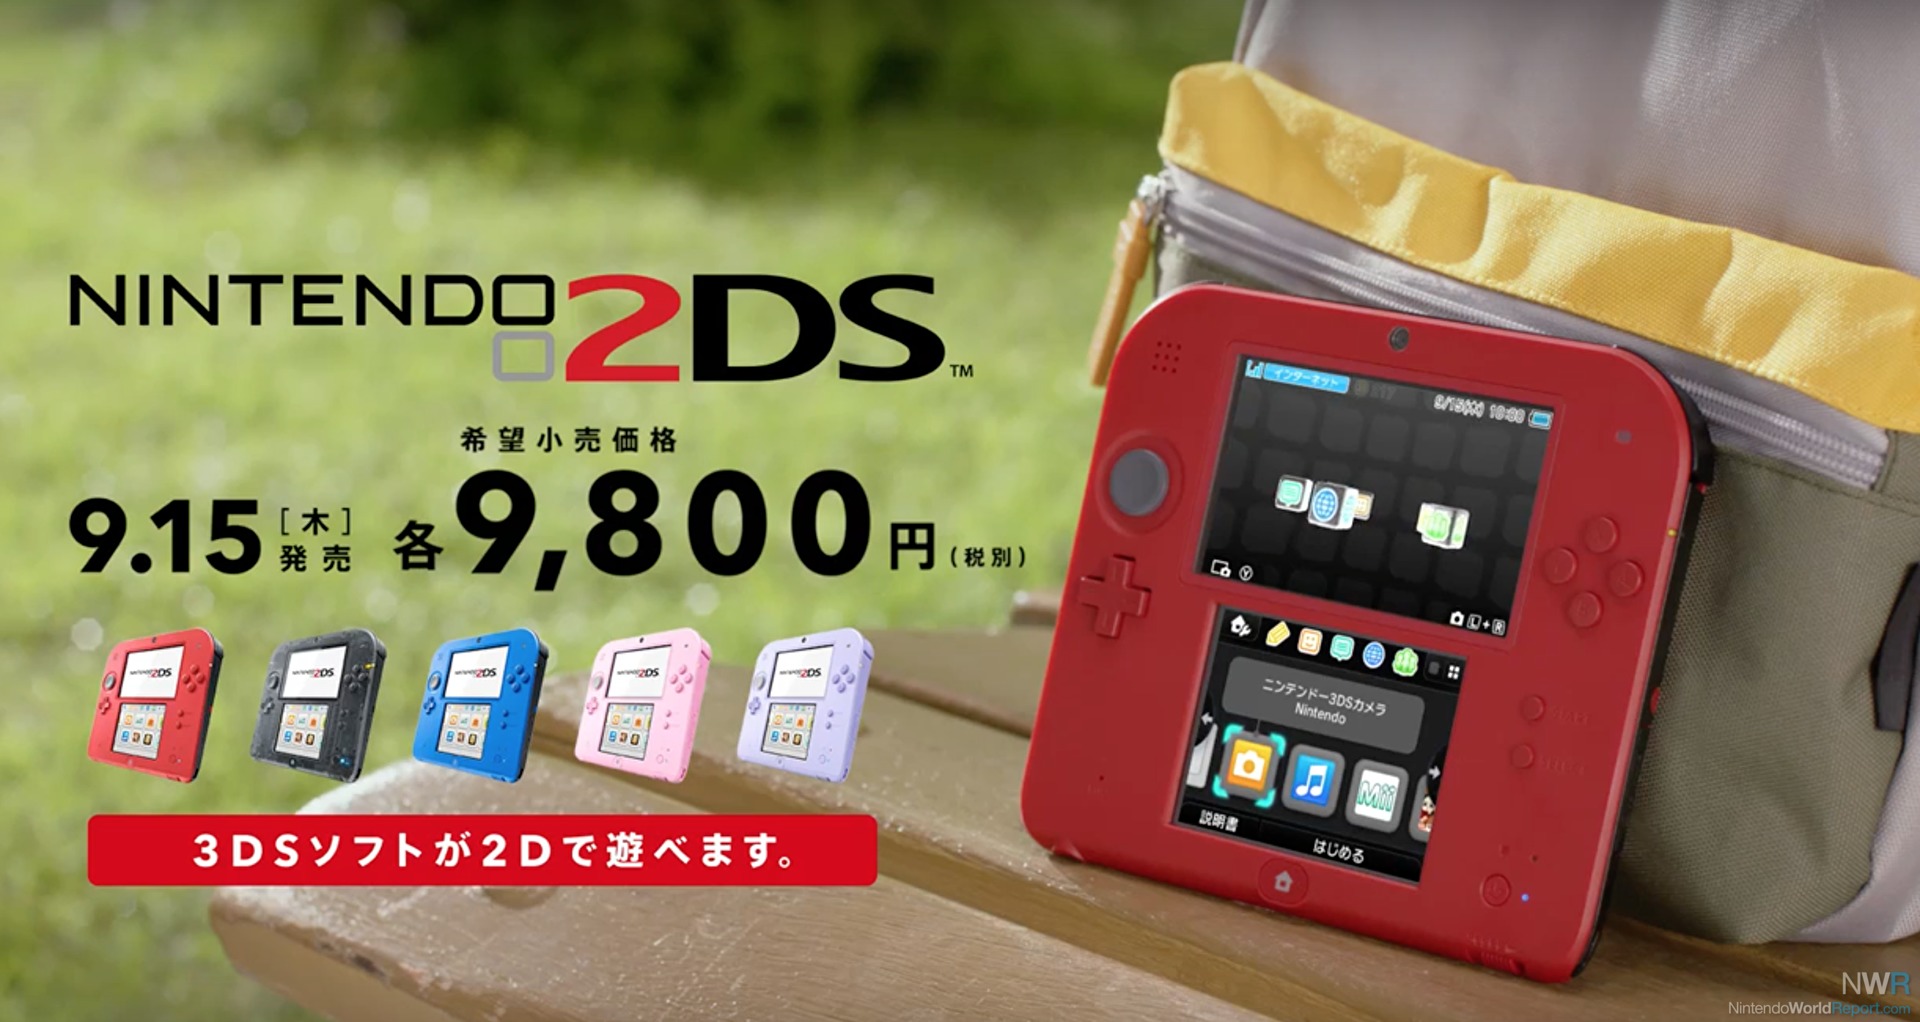 2DS Gets Stand-Alone Release in Japan - News - Nintendo World Report